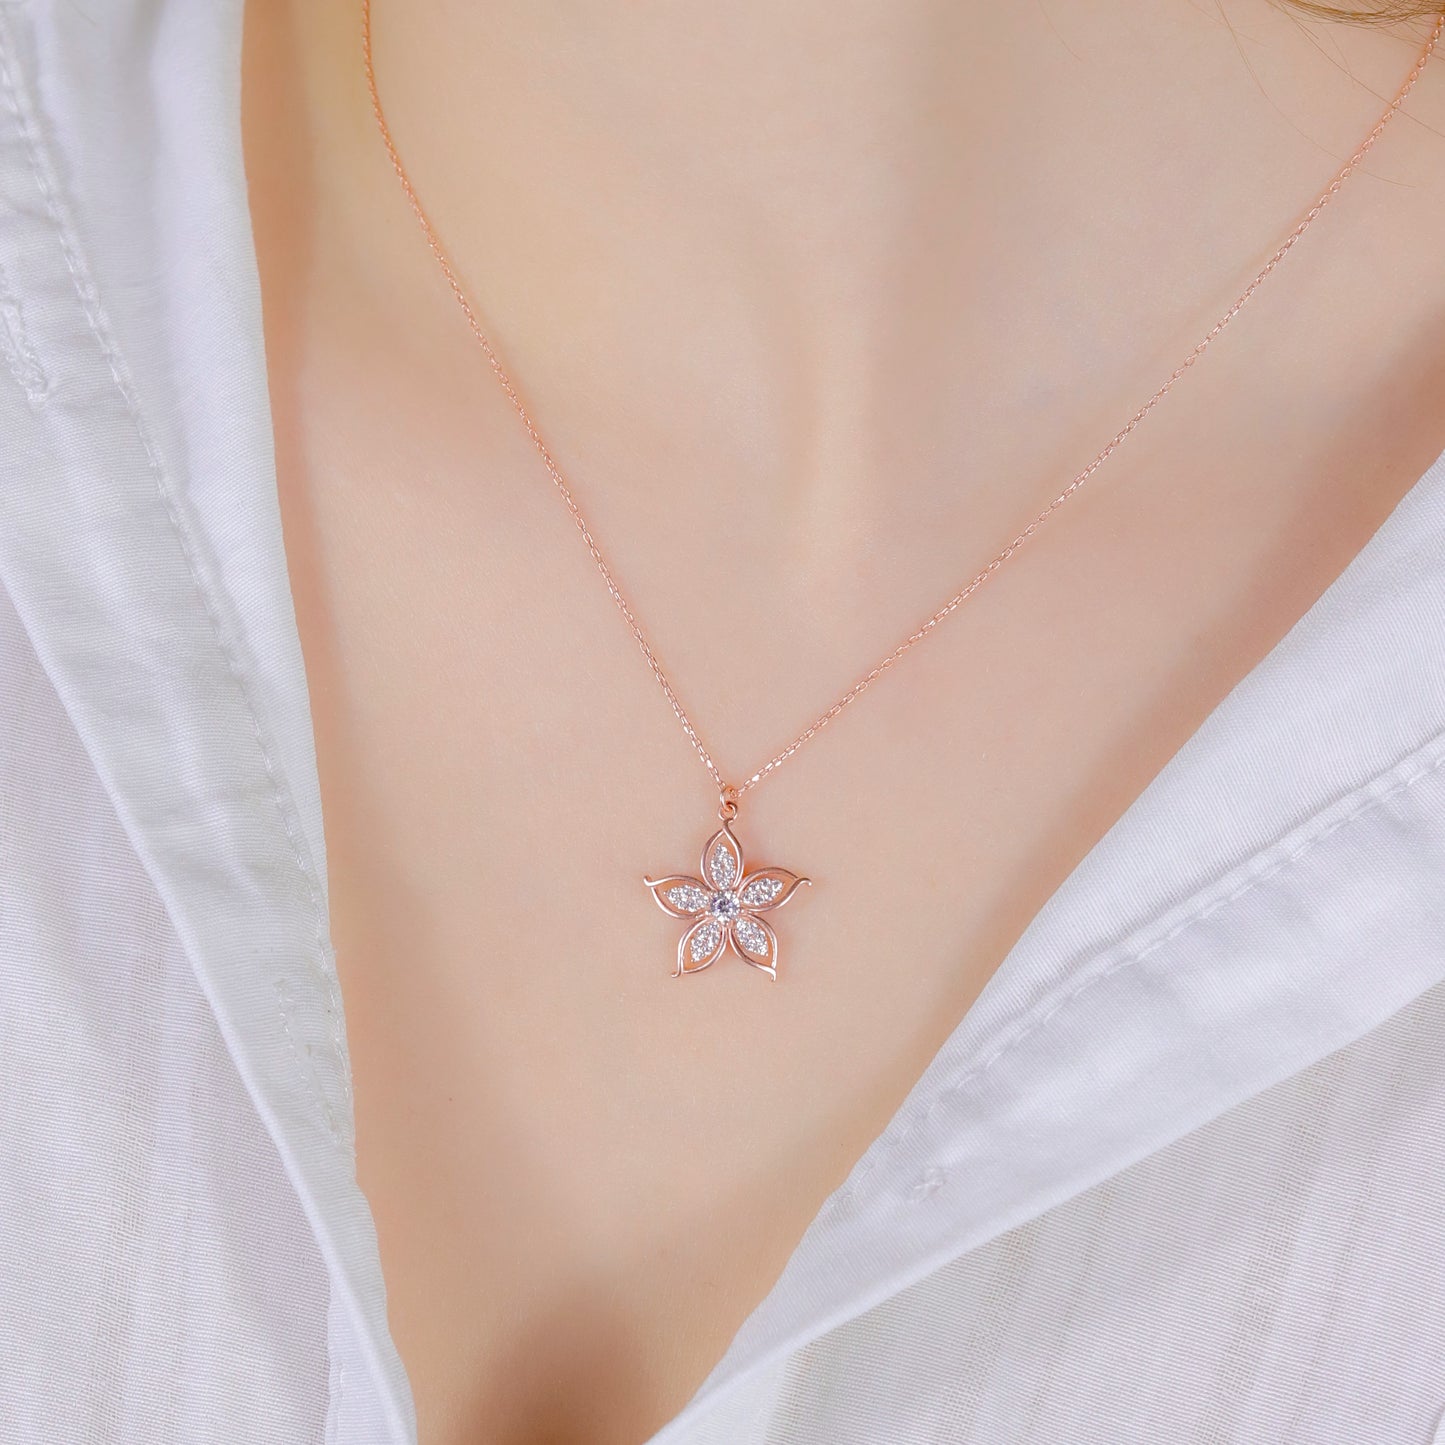 Star Necklace with 925 Sterling Silver Zircon Stone